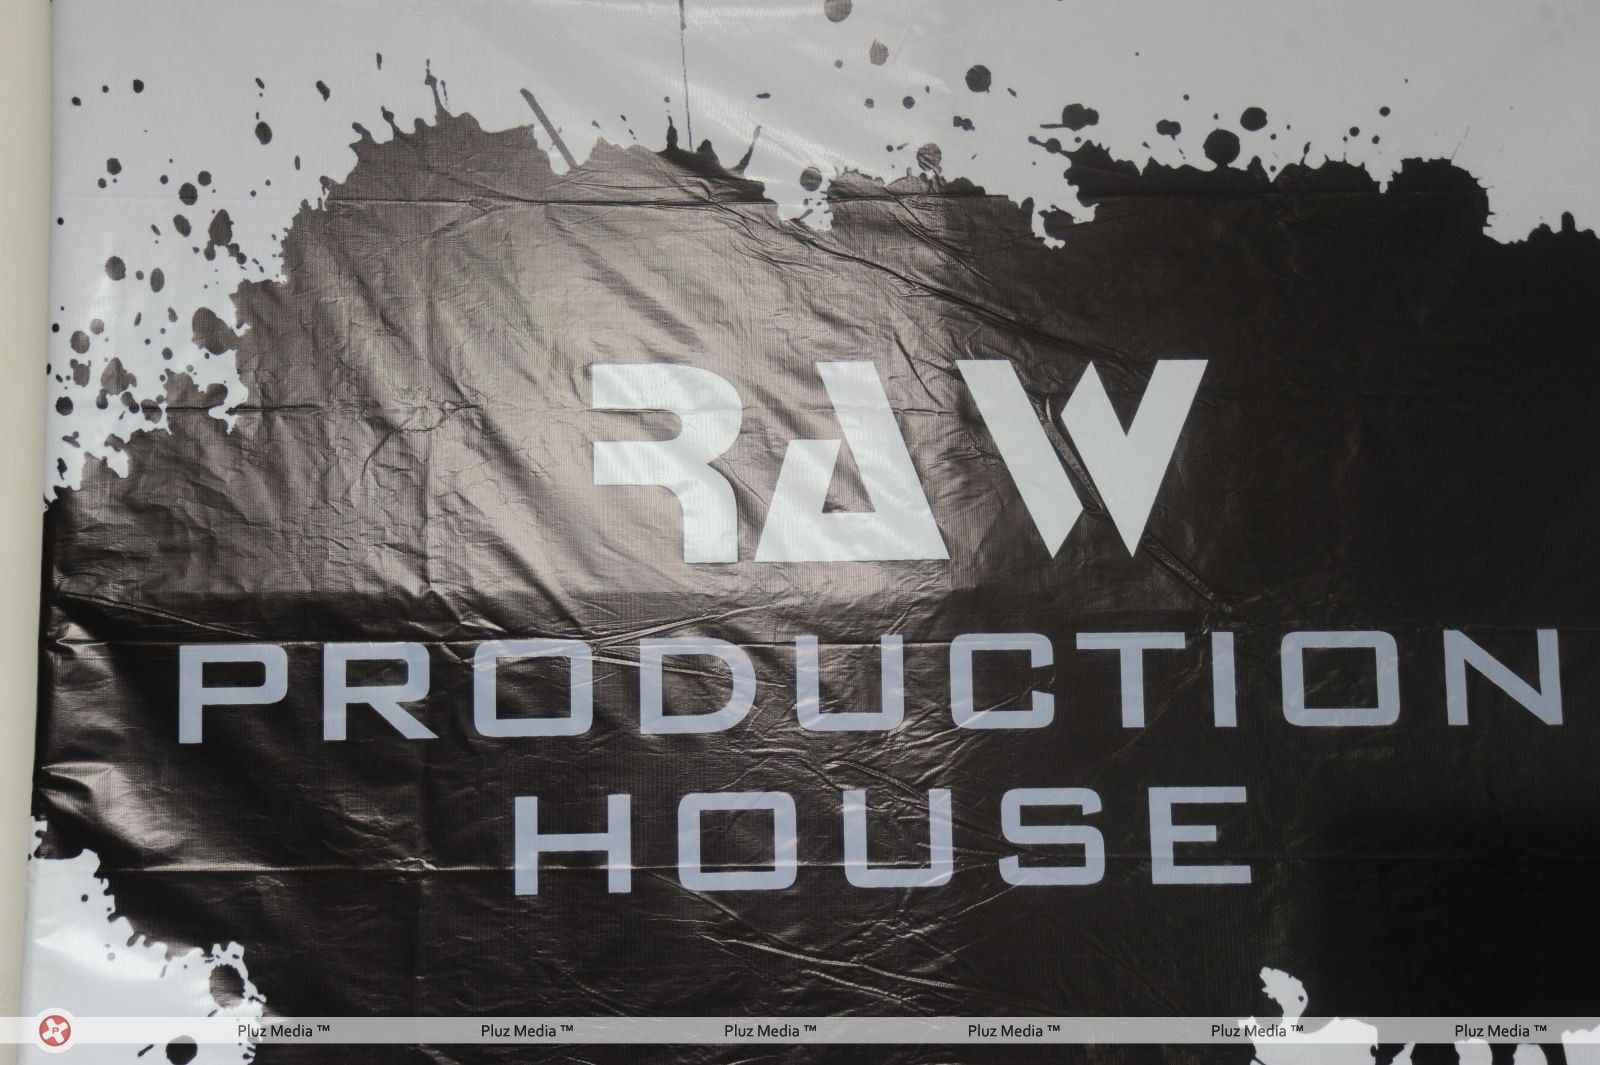 Models At Raw Production House Logo Launch Gallery | Picture 278450